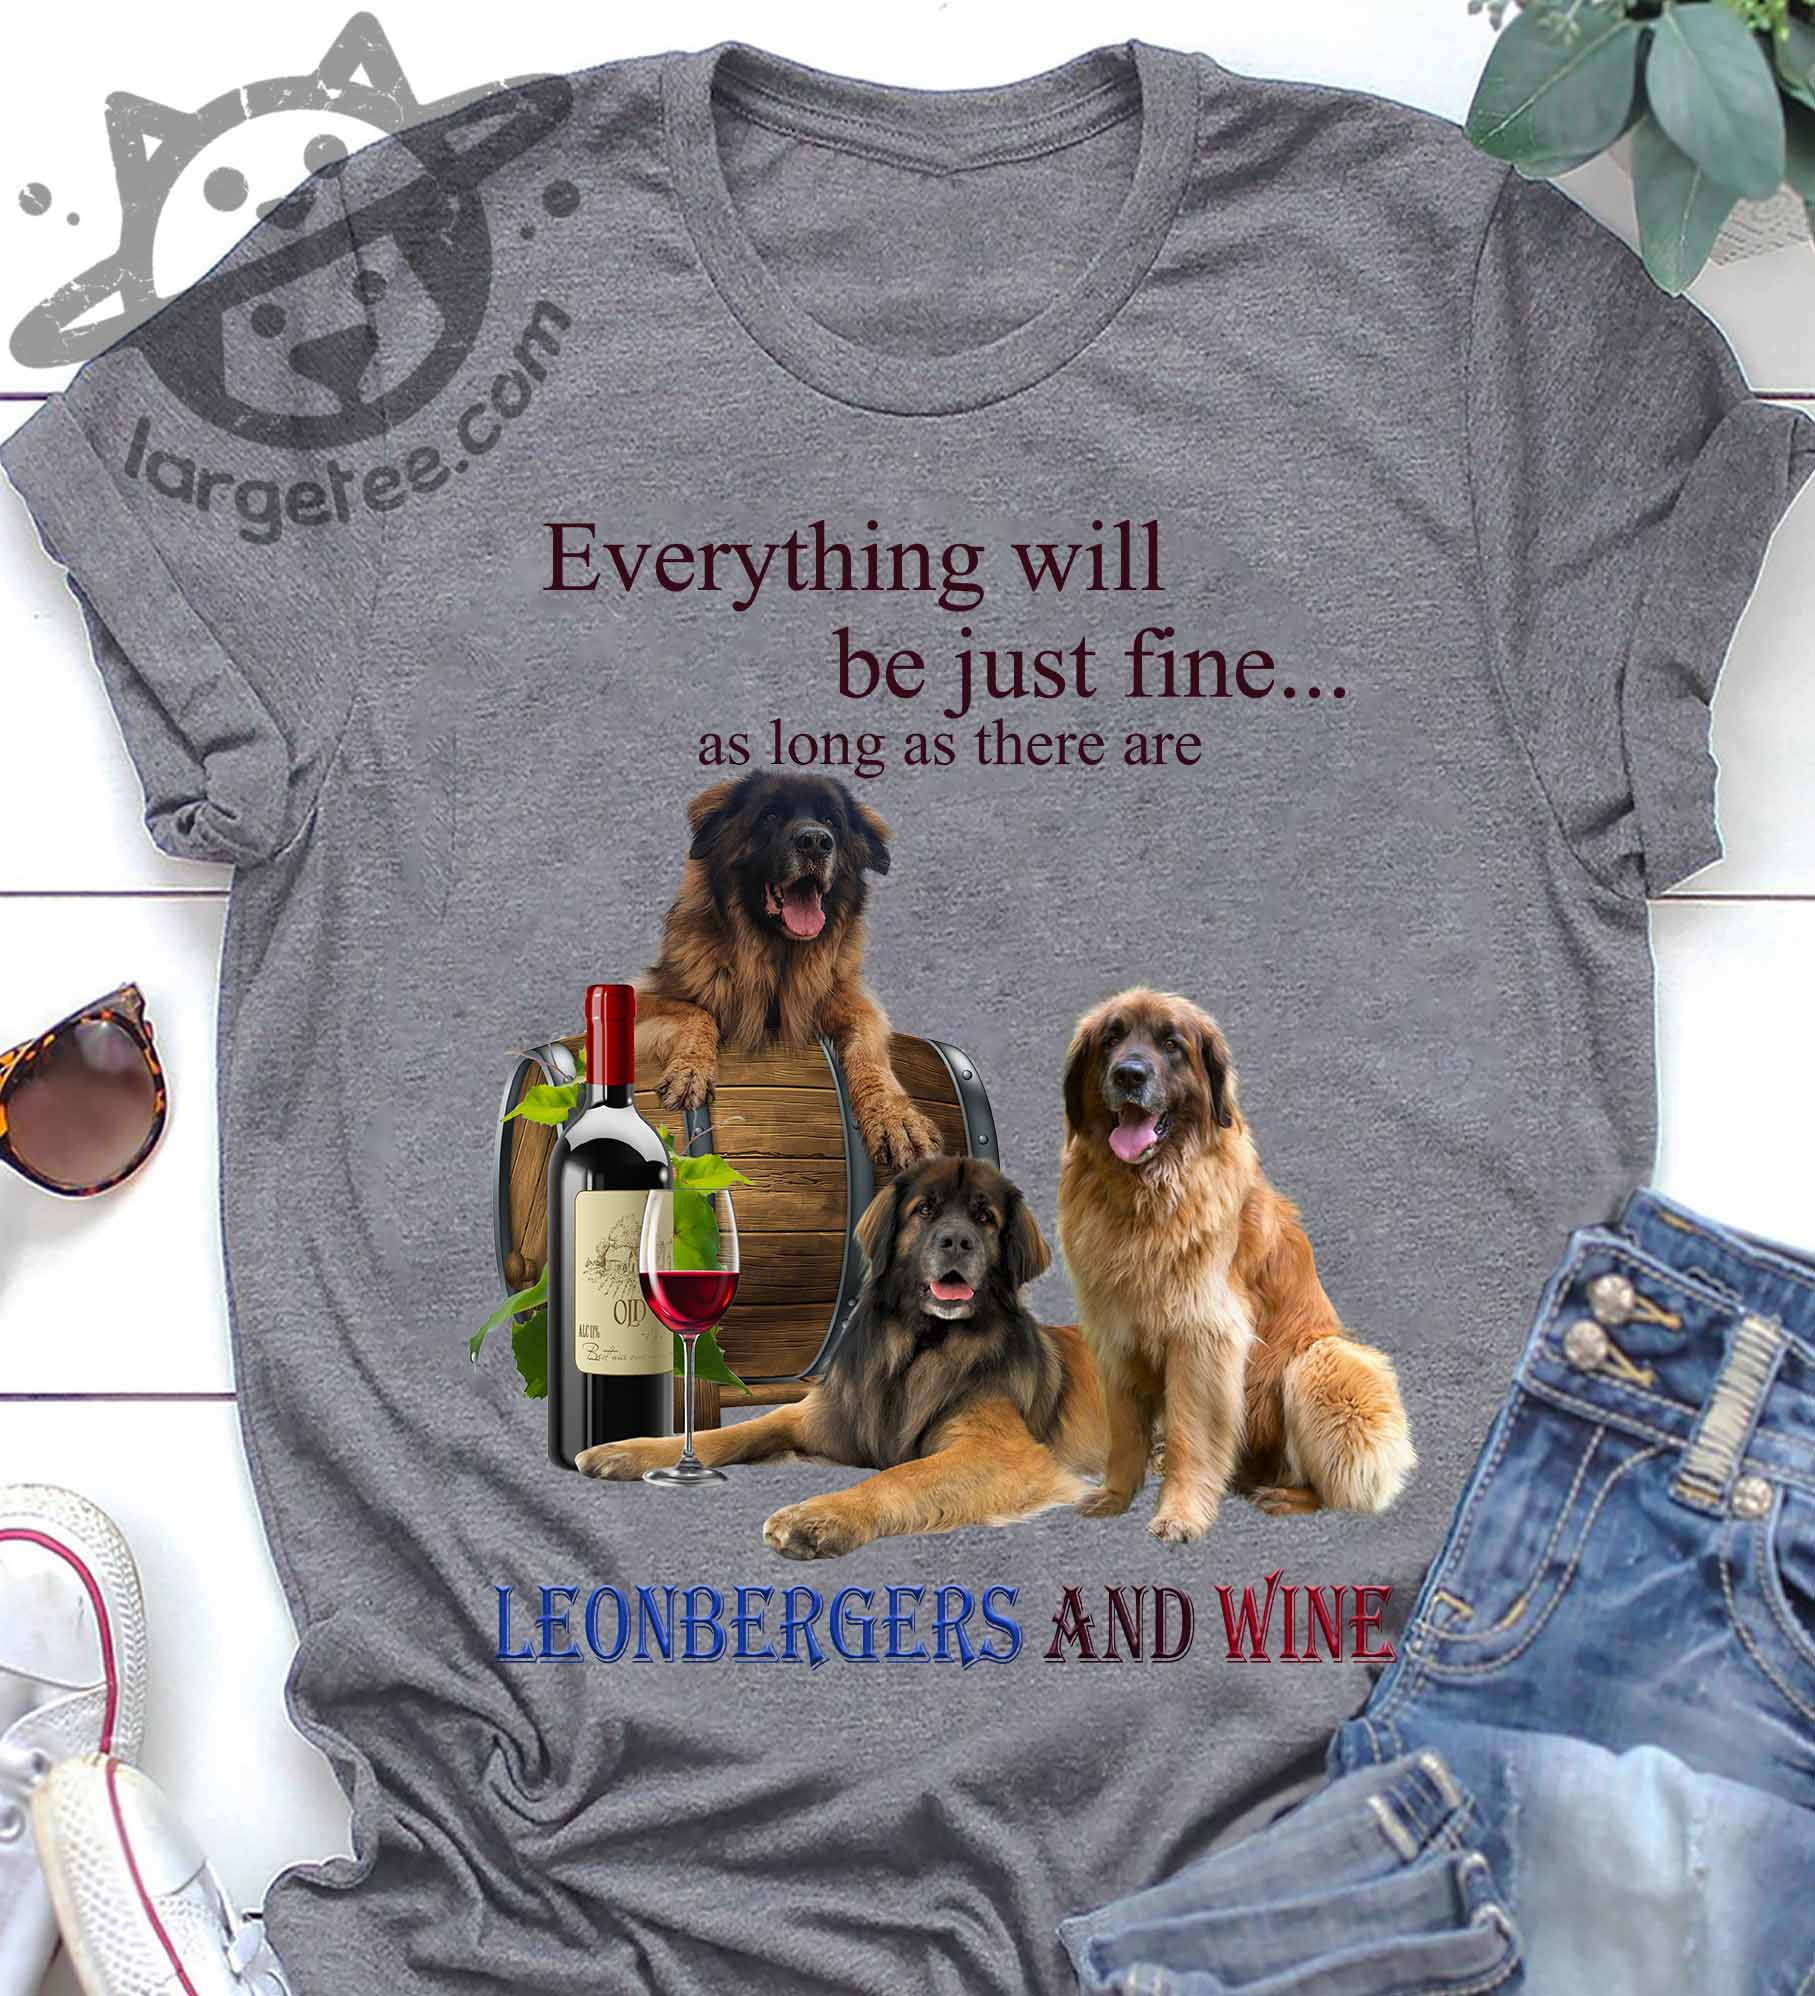 Everything will be just fine as long as there are Leonbergers and wine